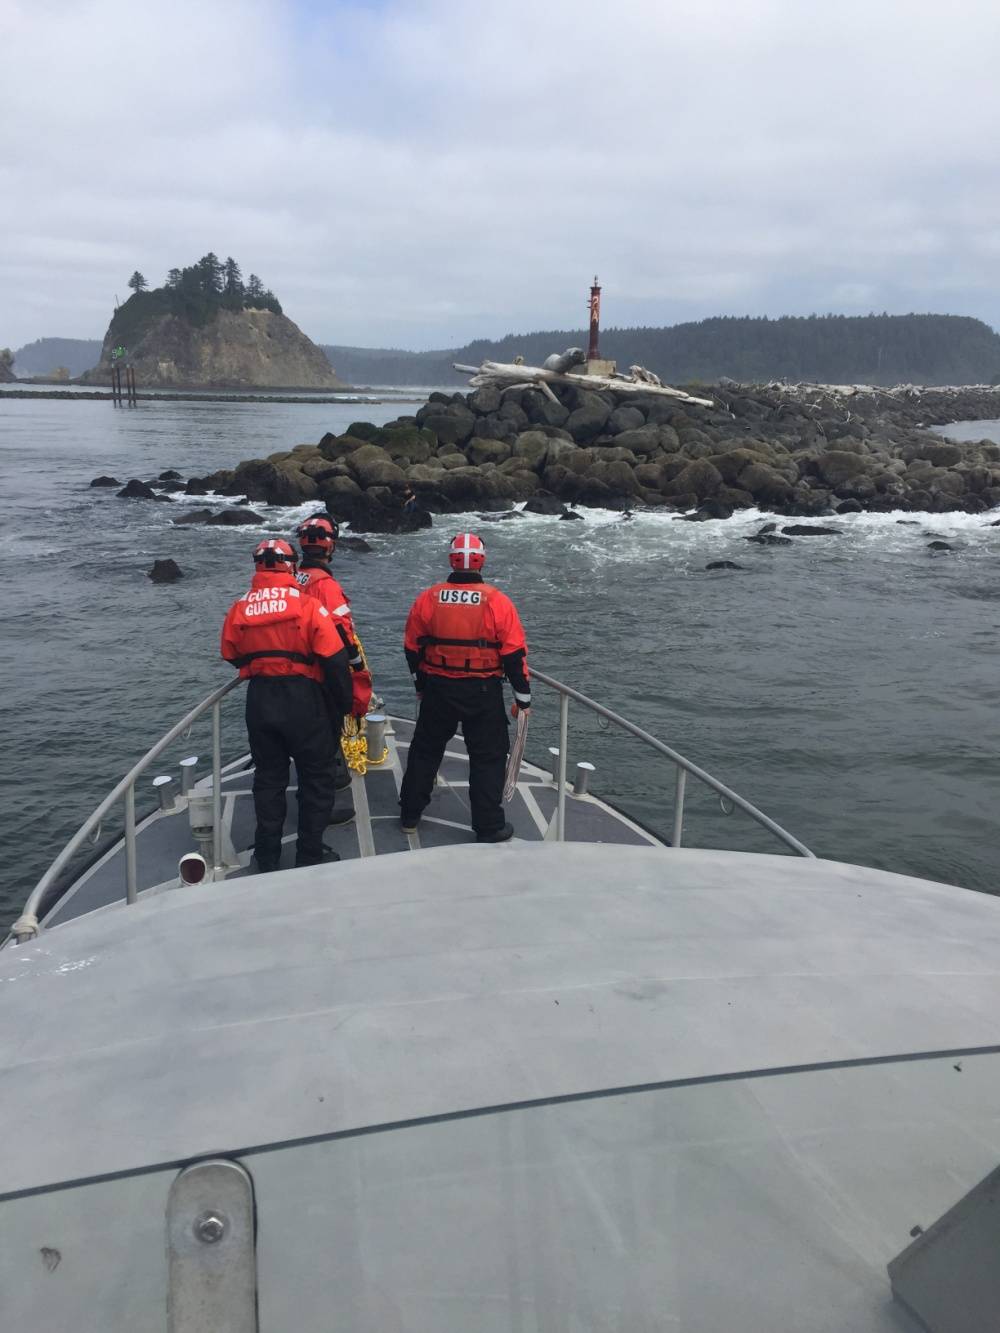 Coast Guard crewmembers aboard a 47-foot Motor Life Boat from Station Quillayute River located in La Push, Wash., prepare to rescue a swimmer sitting on rocks near James Island, Aug. 16, 2018.                                U.S Coast Guard photo by Petty Officer 1st Class Louis Keating.